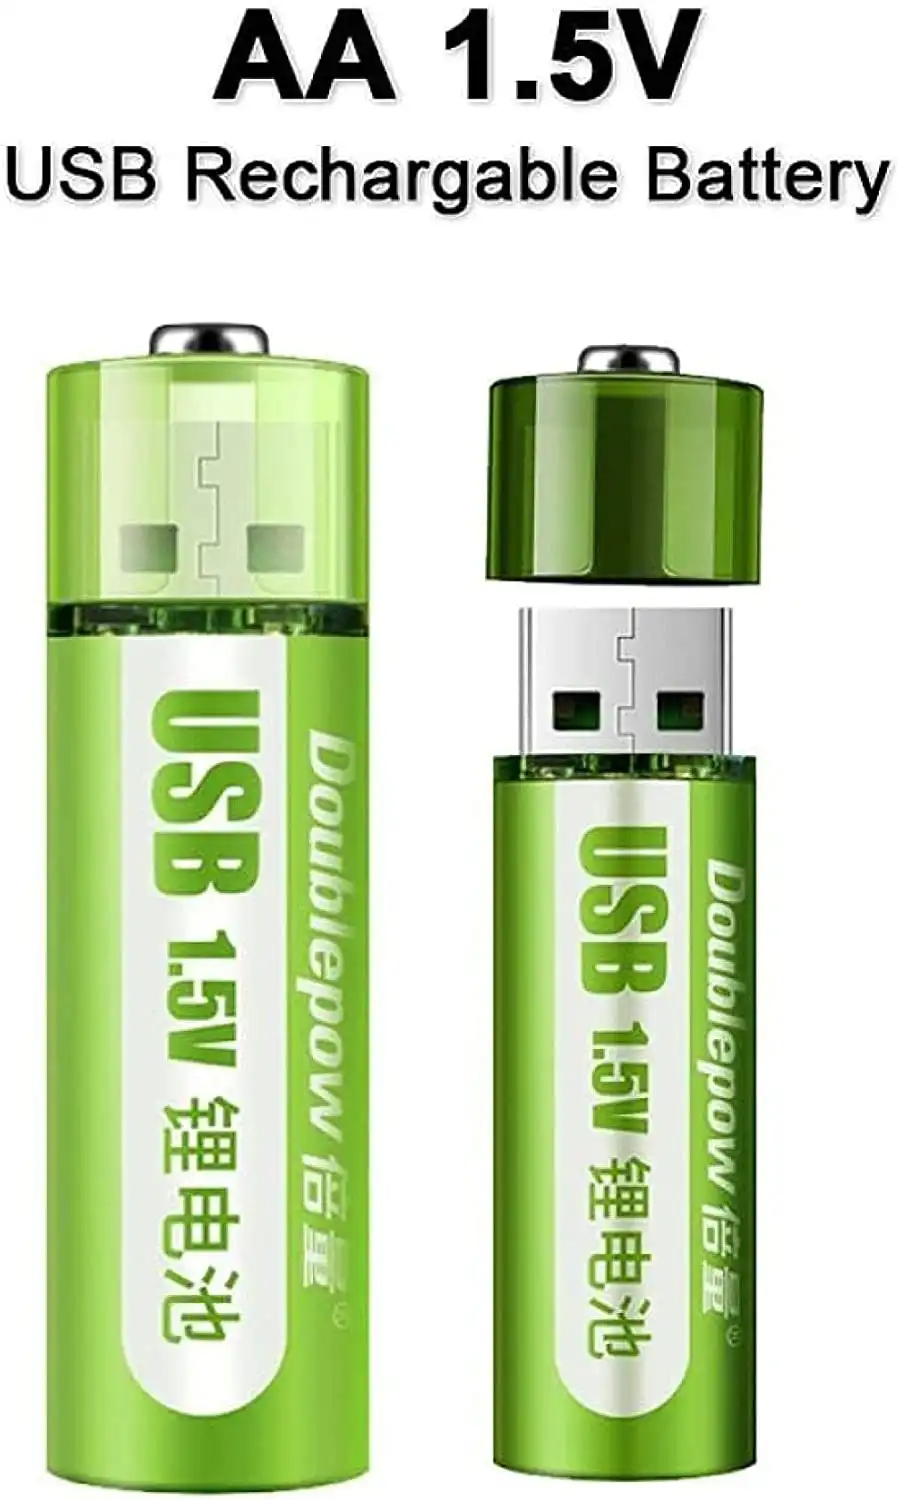 AA Battery 1800mWh USB Rechargeable li-ion Battery 1.5v